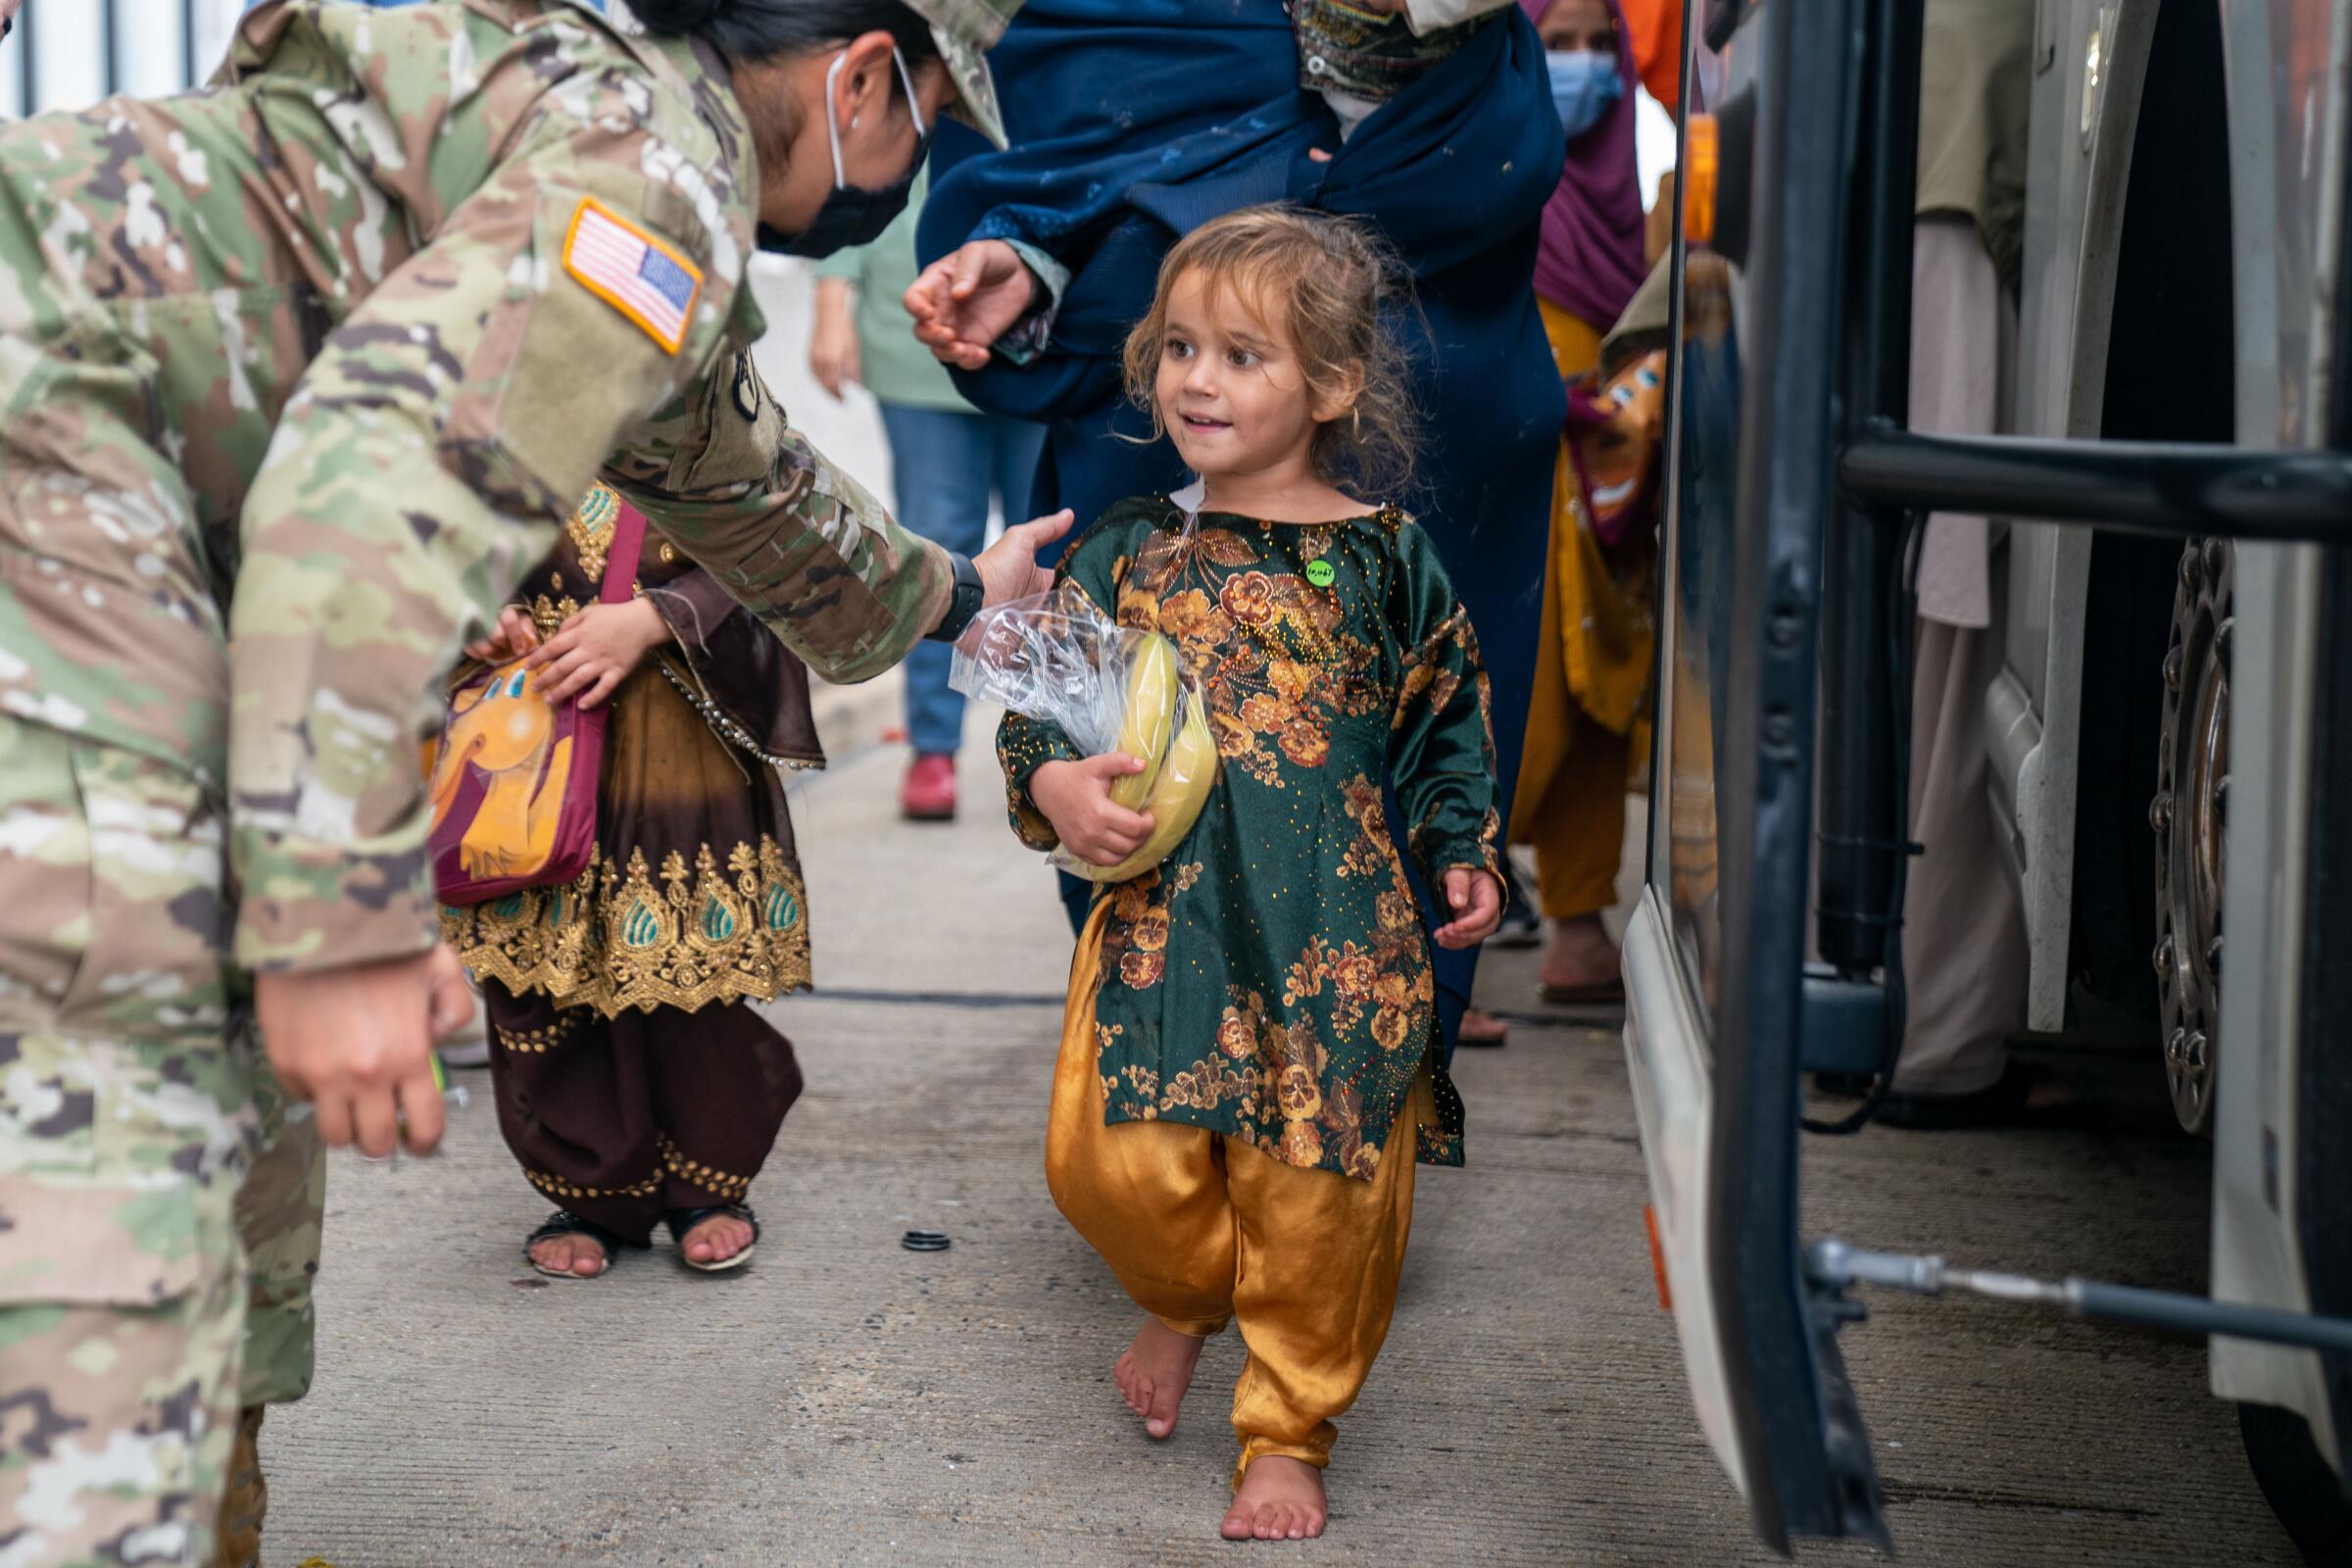 A U.S. service member greets a smiling child in a colorful outfit 